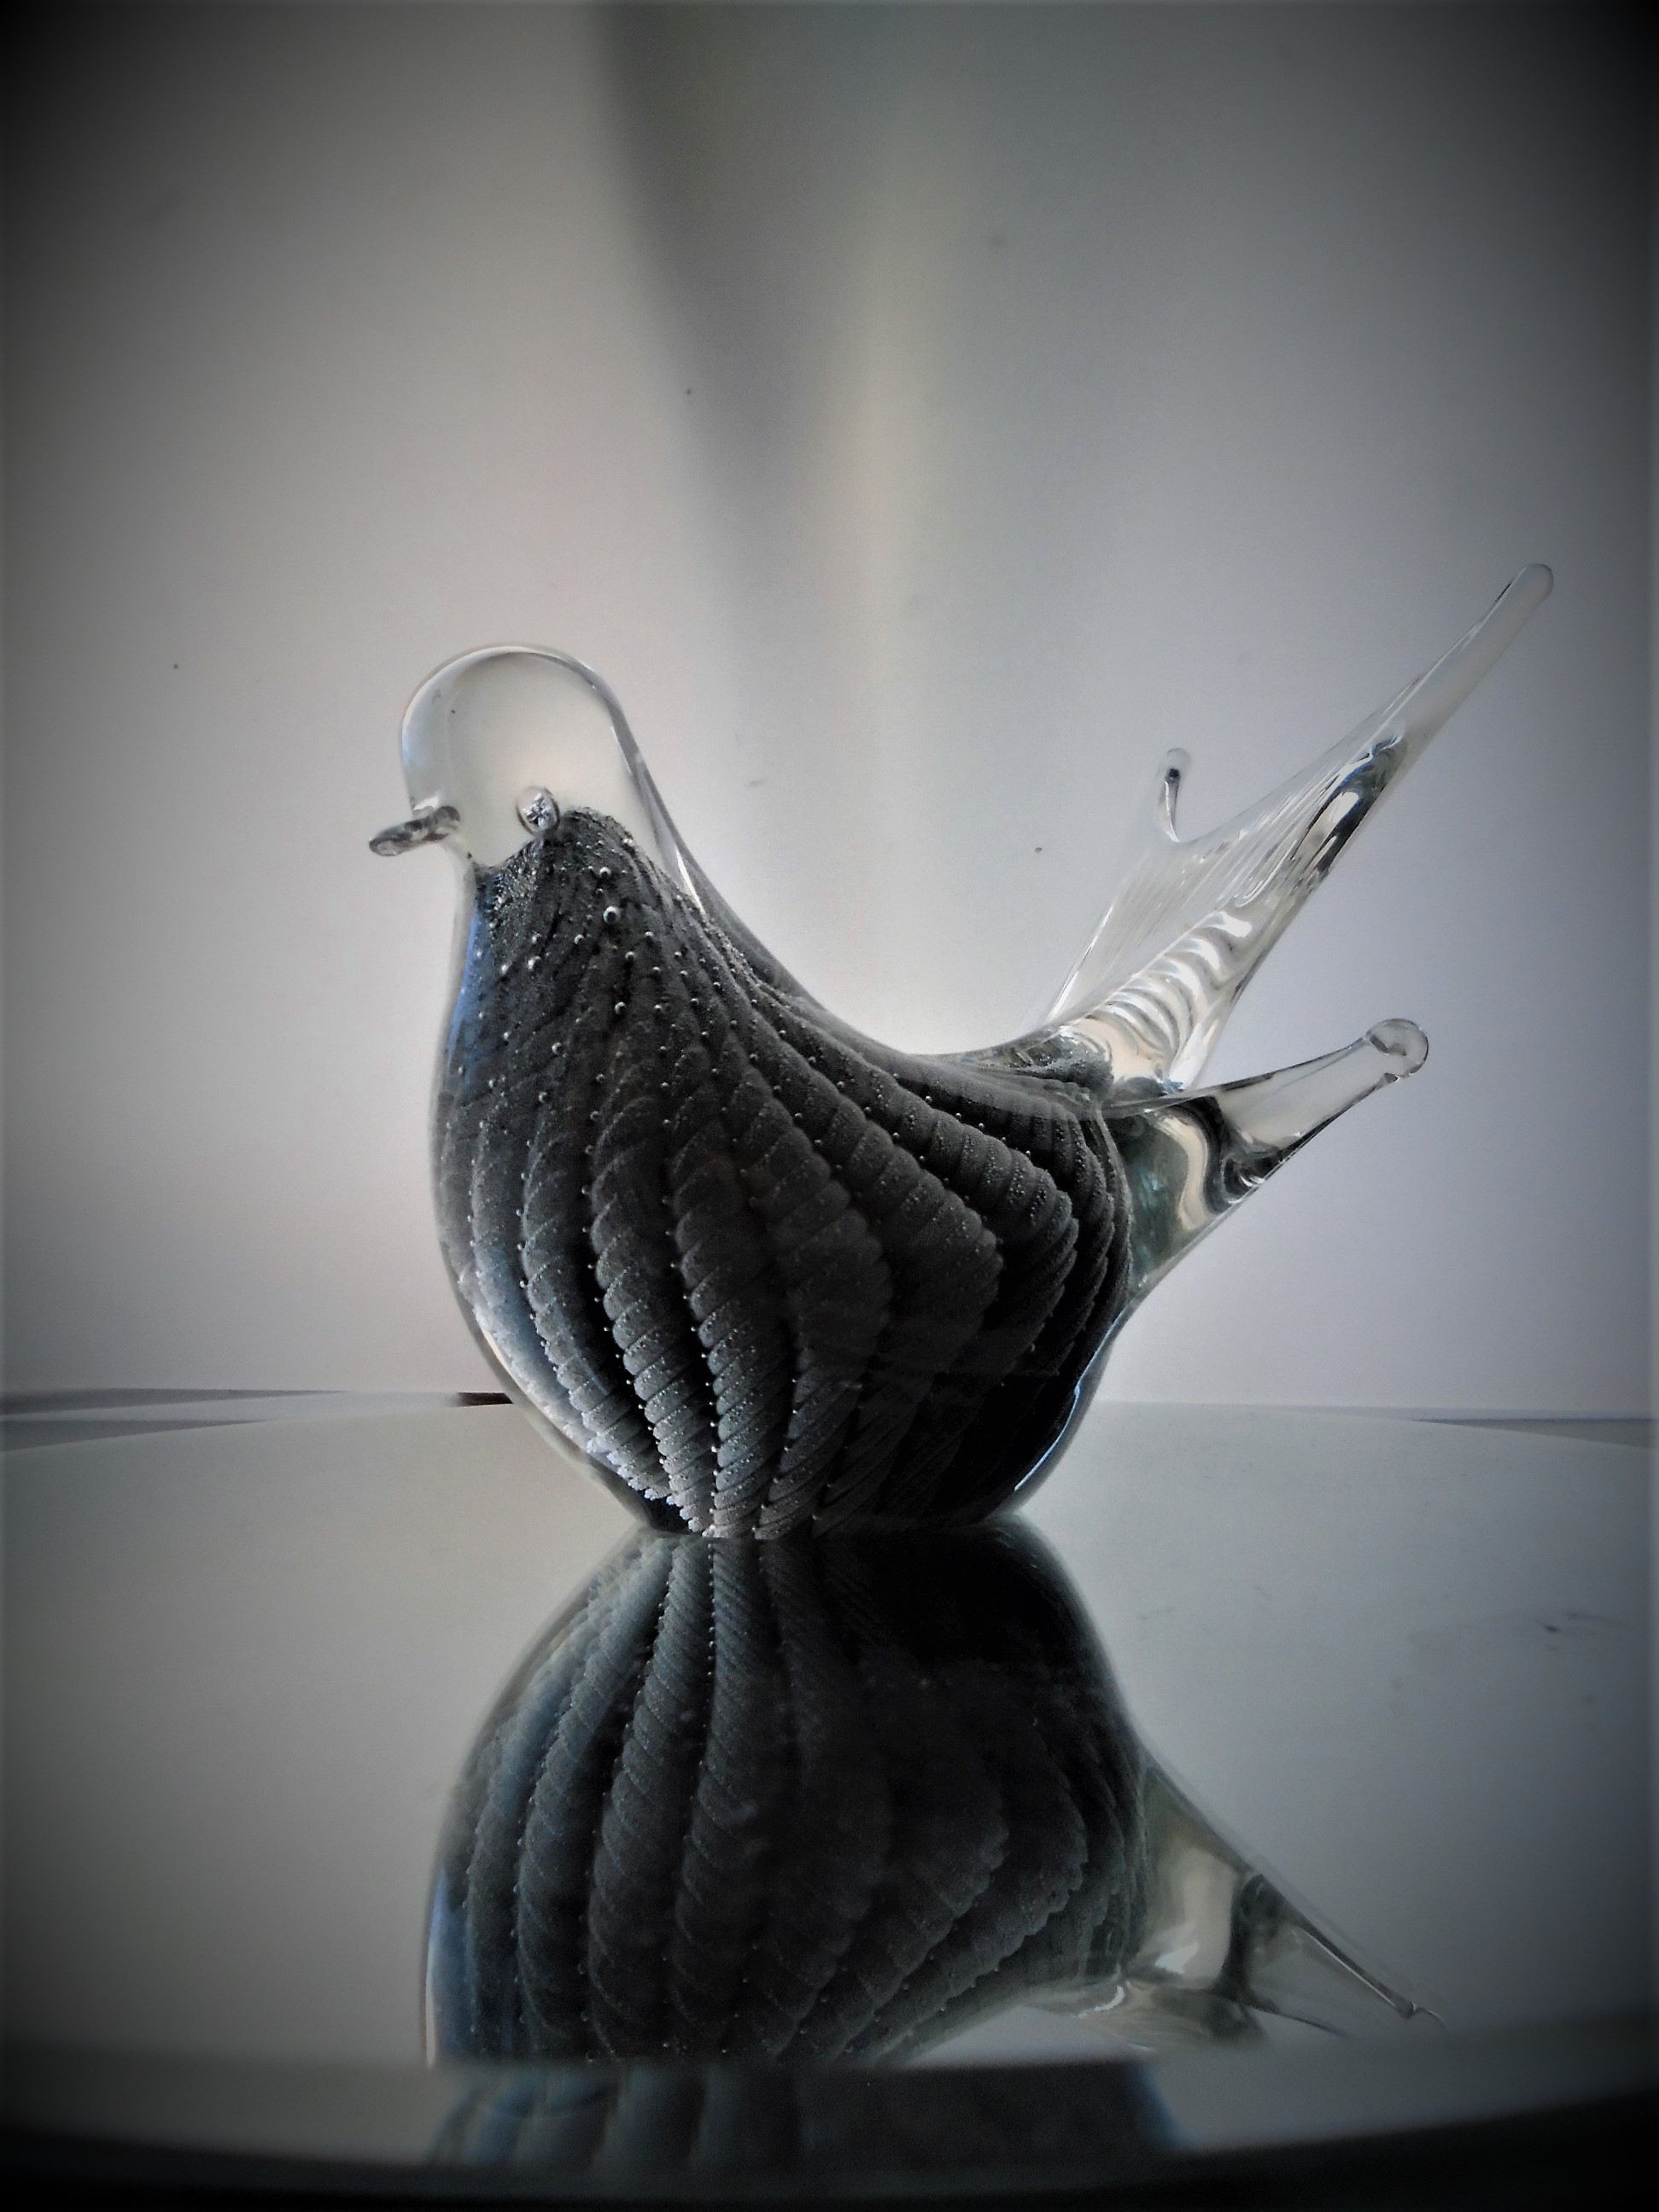 Stunning example of a VINTAGE MURANO GLASS BIRD FIGURINE FROM GLASS MAKER V. NASSON